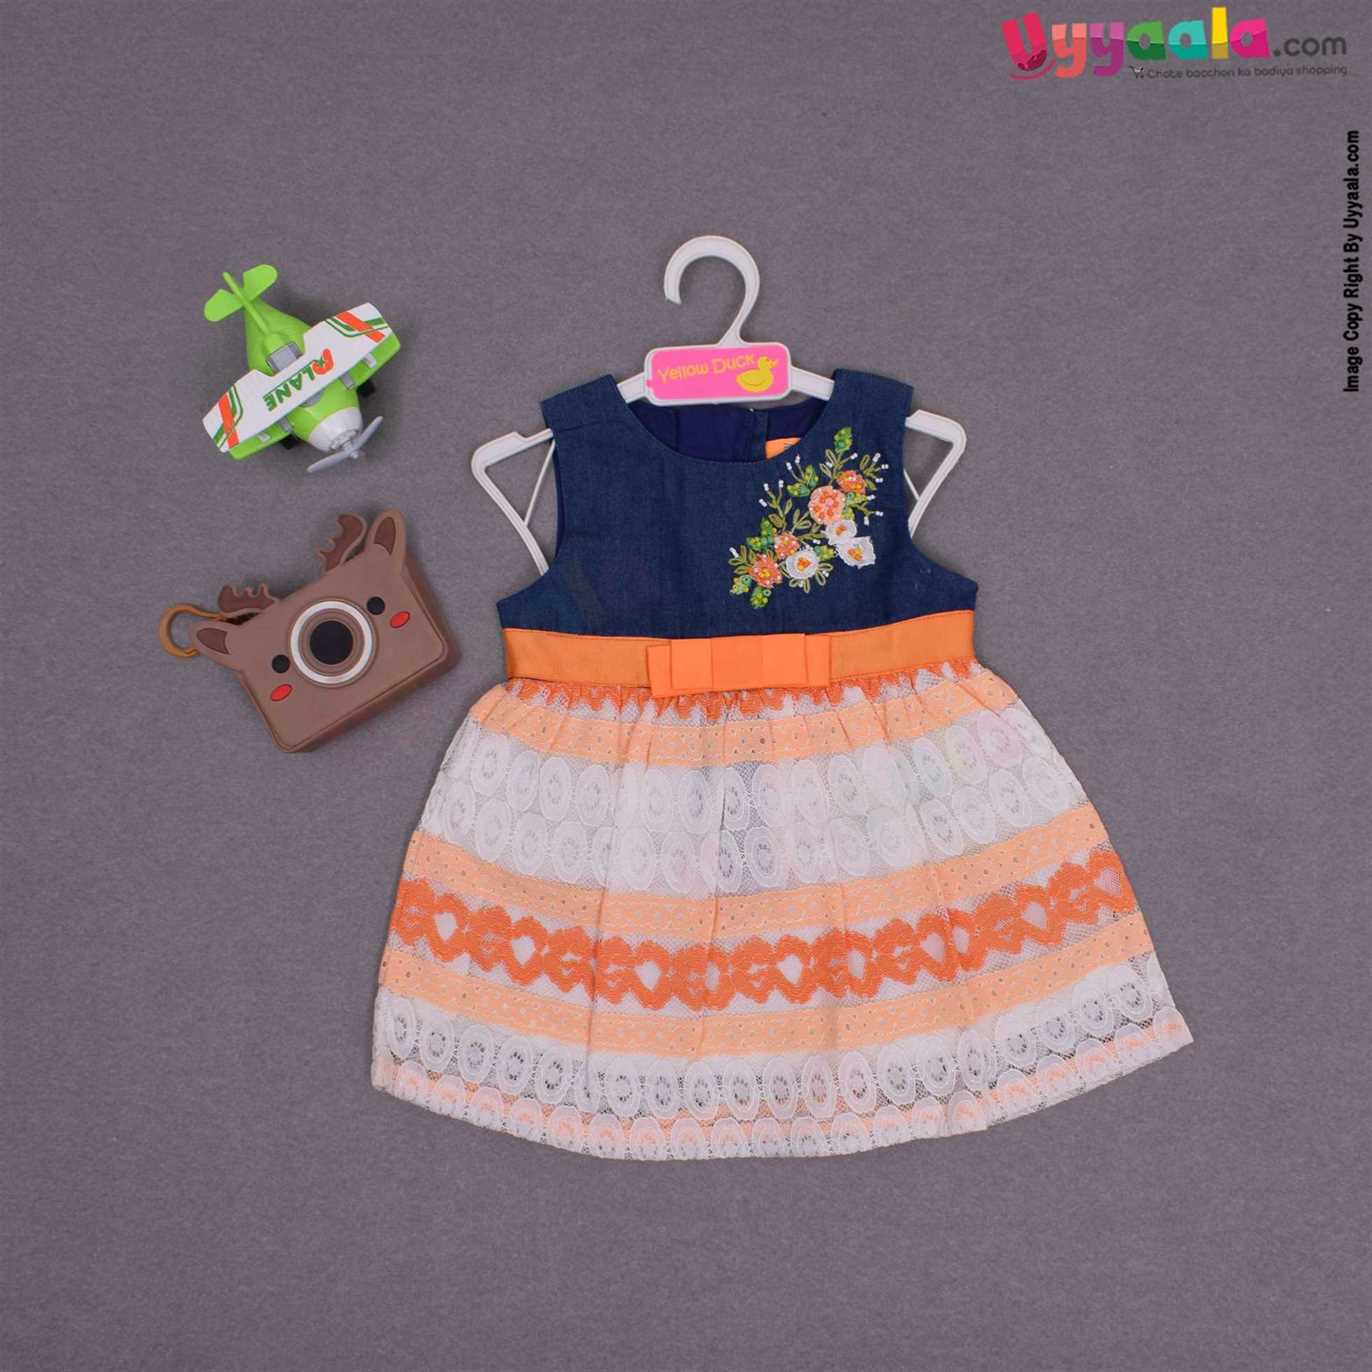 Sleeveless party wear frock for baby girl